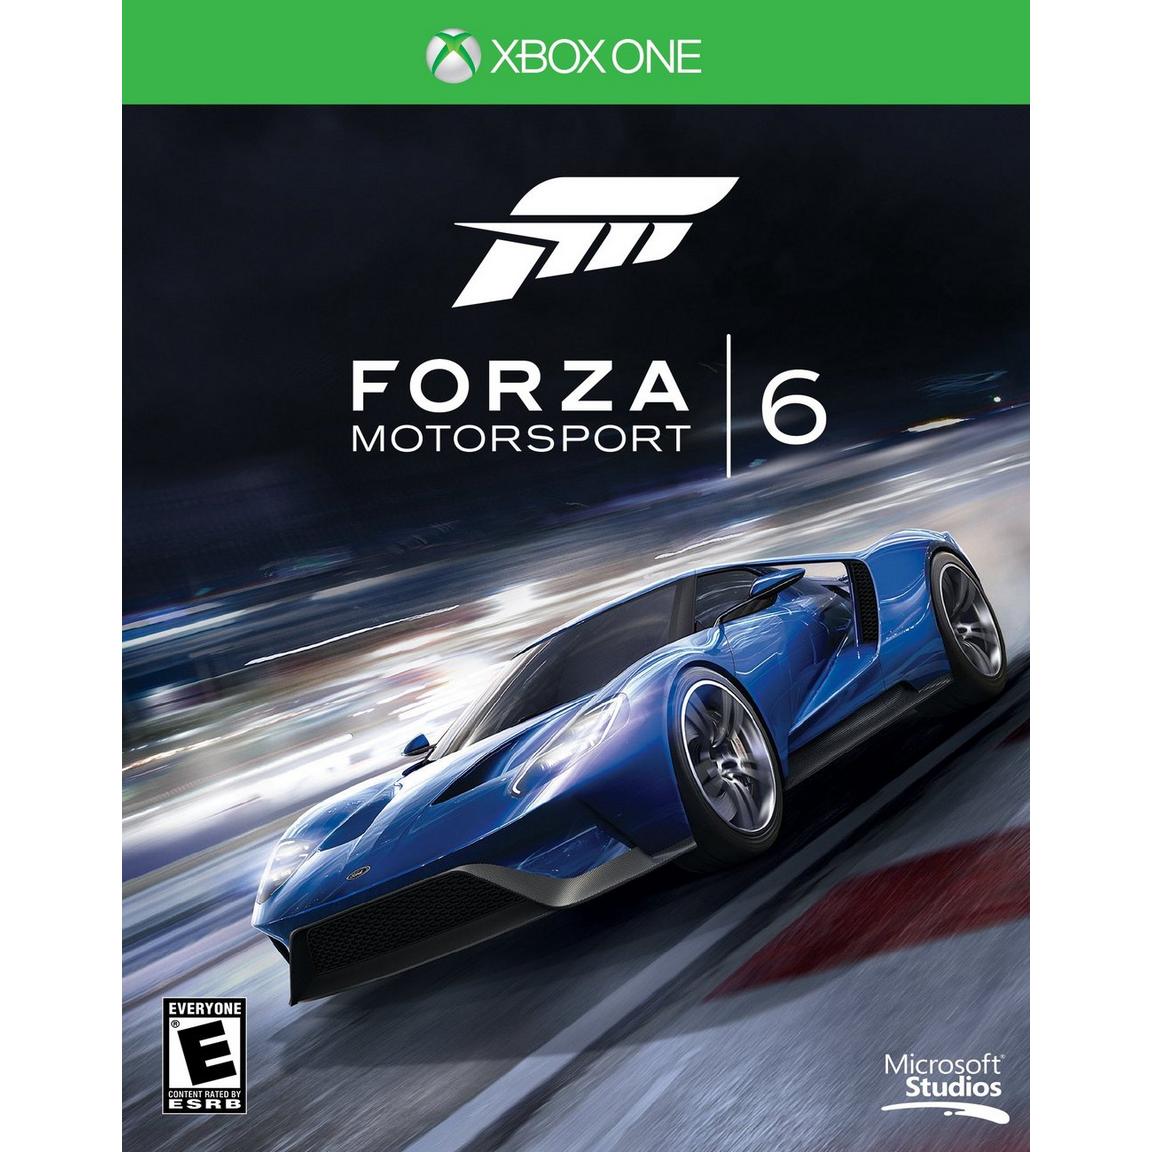 Forza Motorsport 6 - Xbox One, Pre-Owned -  Microsoft